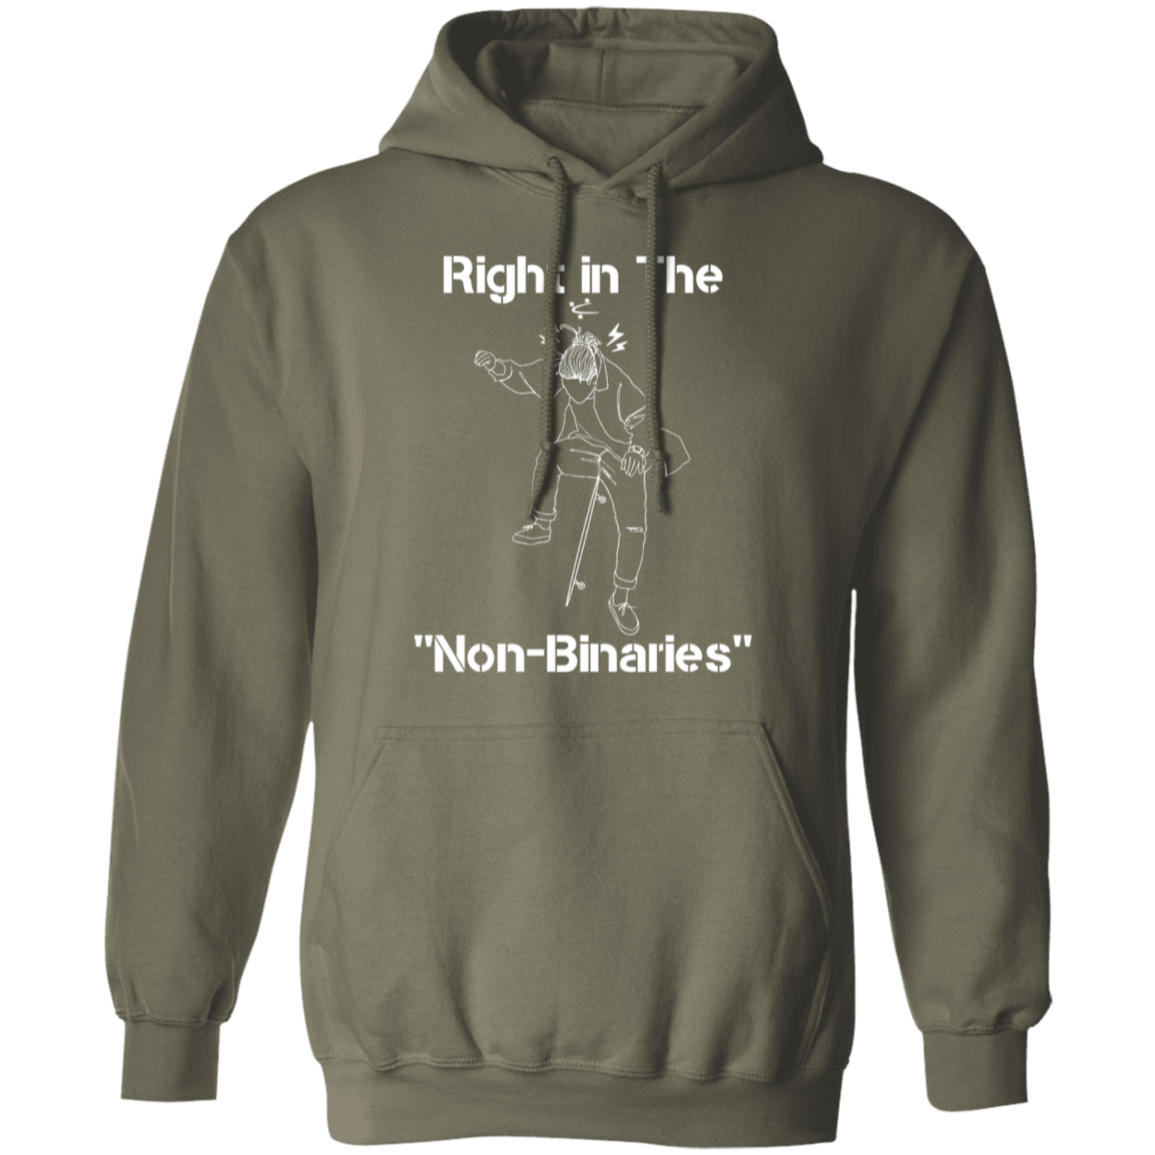 Right in the "Non-Binaries" Pullover Hoodie